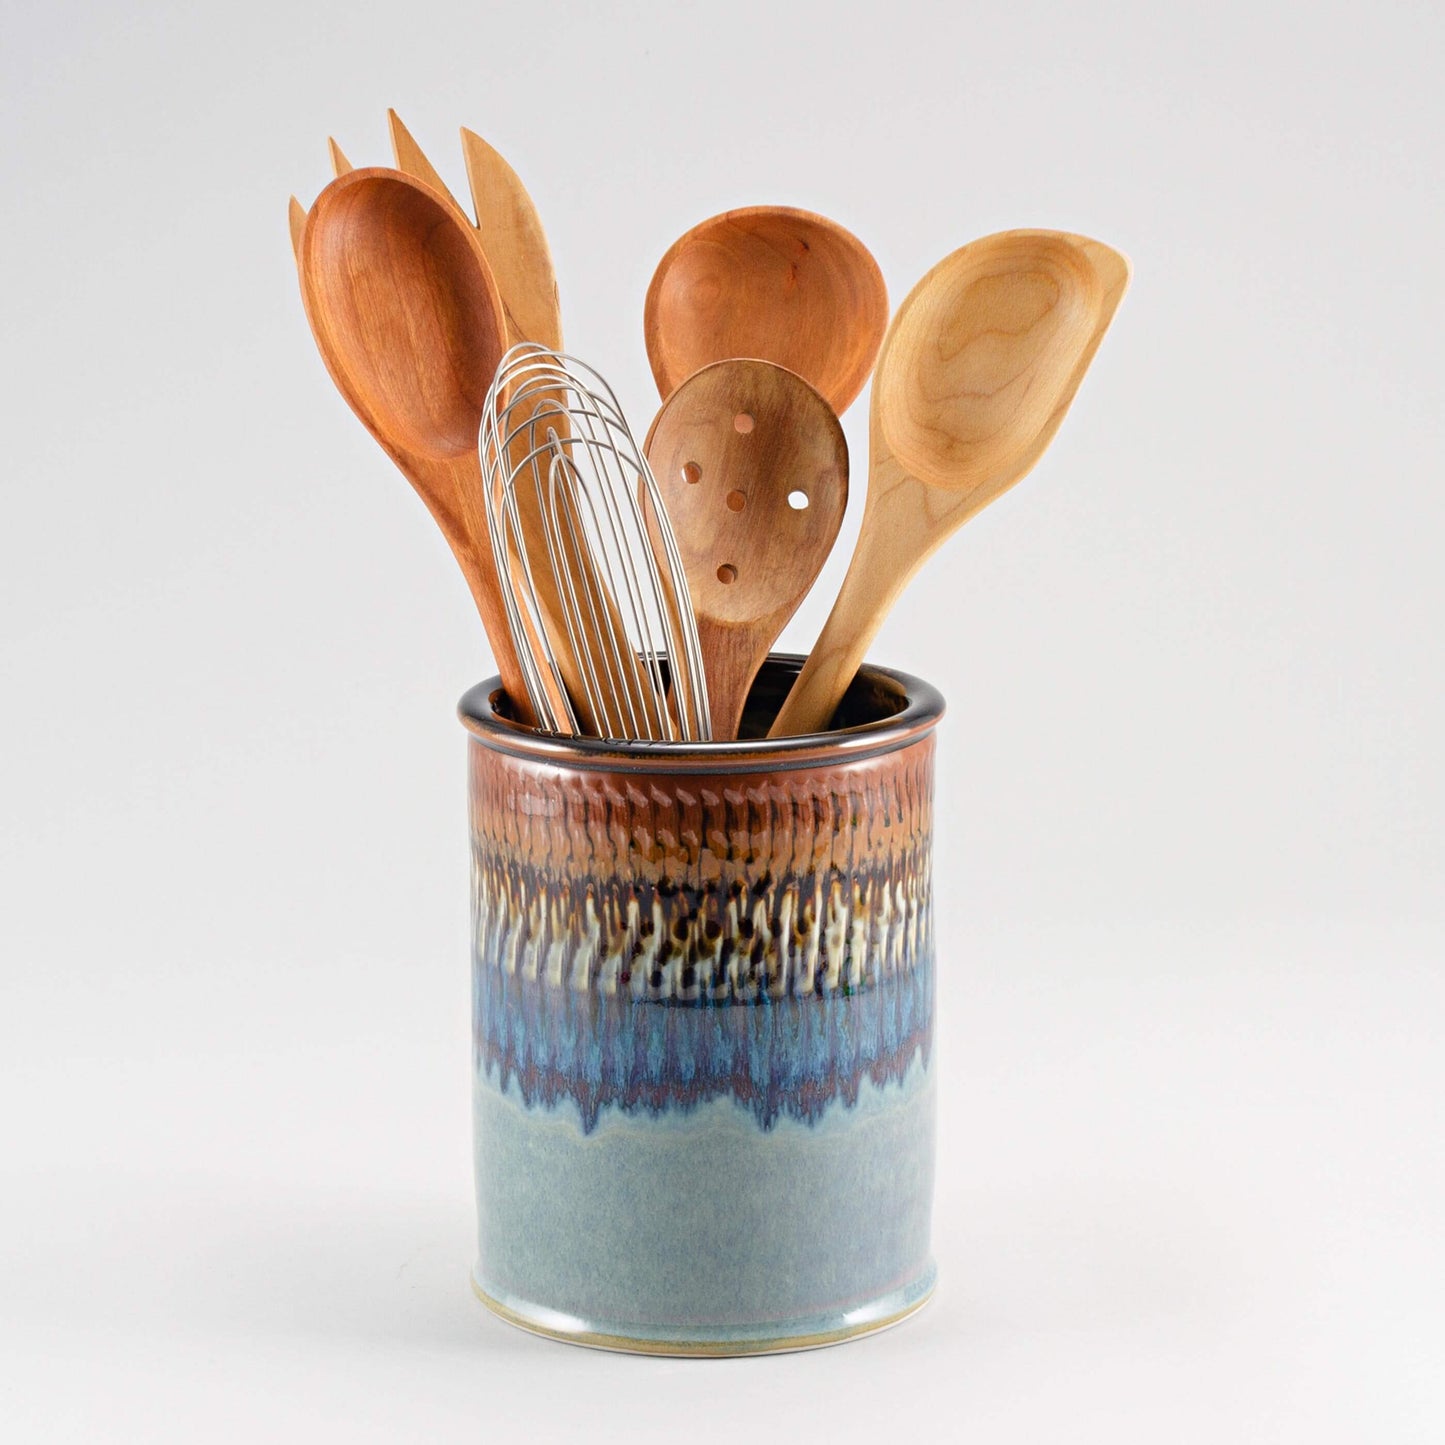 Handmade Pottery Utensil Holder in Purple Hamada pattern made by Georgetown Pottery in Maine